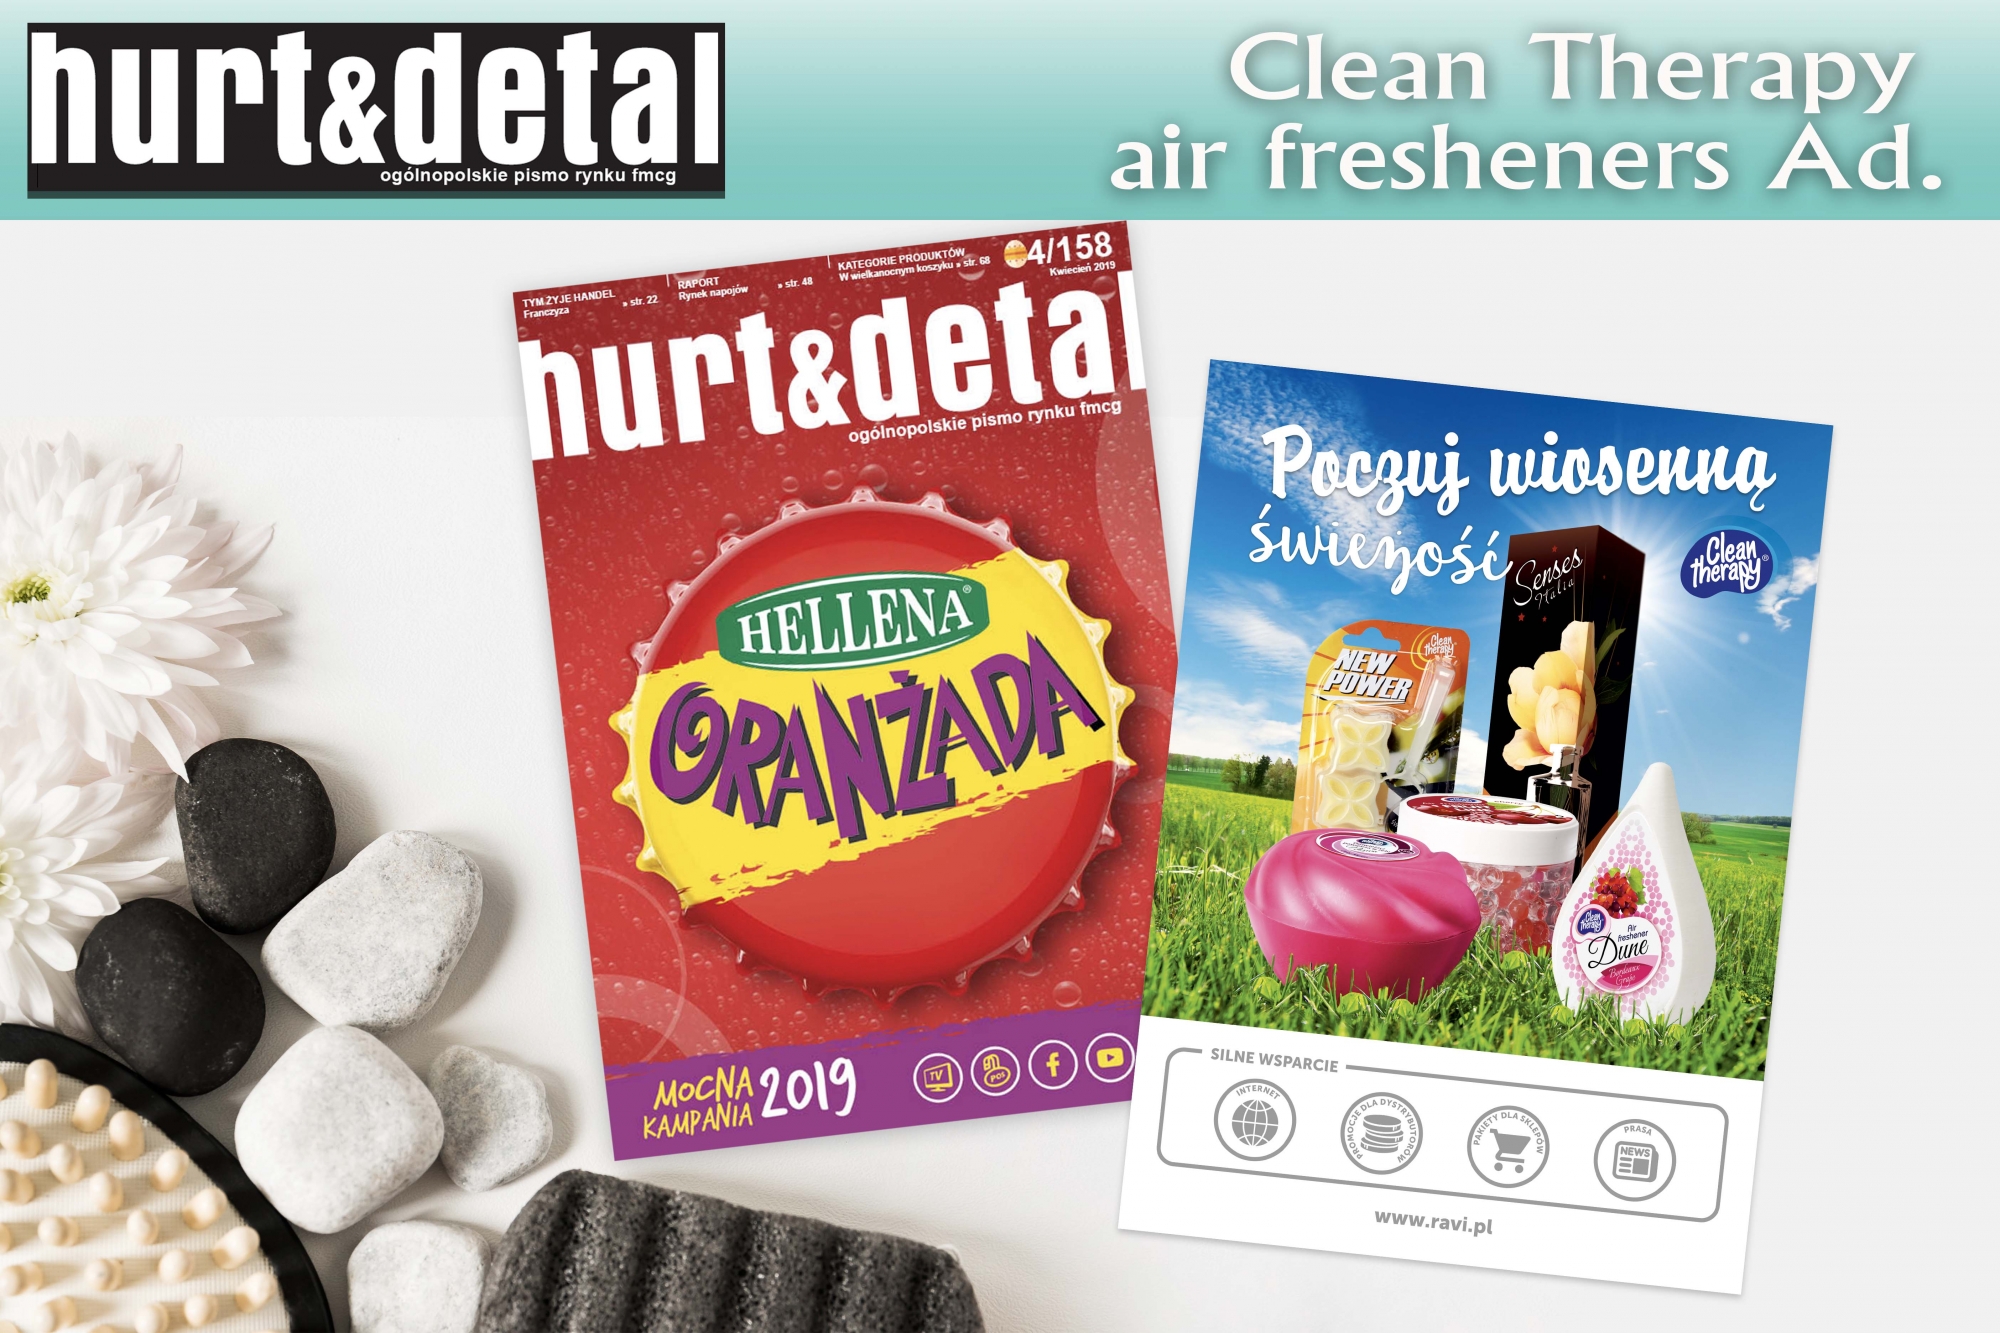 April 2019 Clean Therapy air fresheners ad.